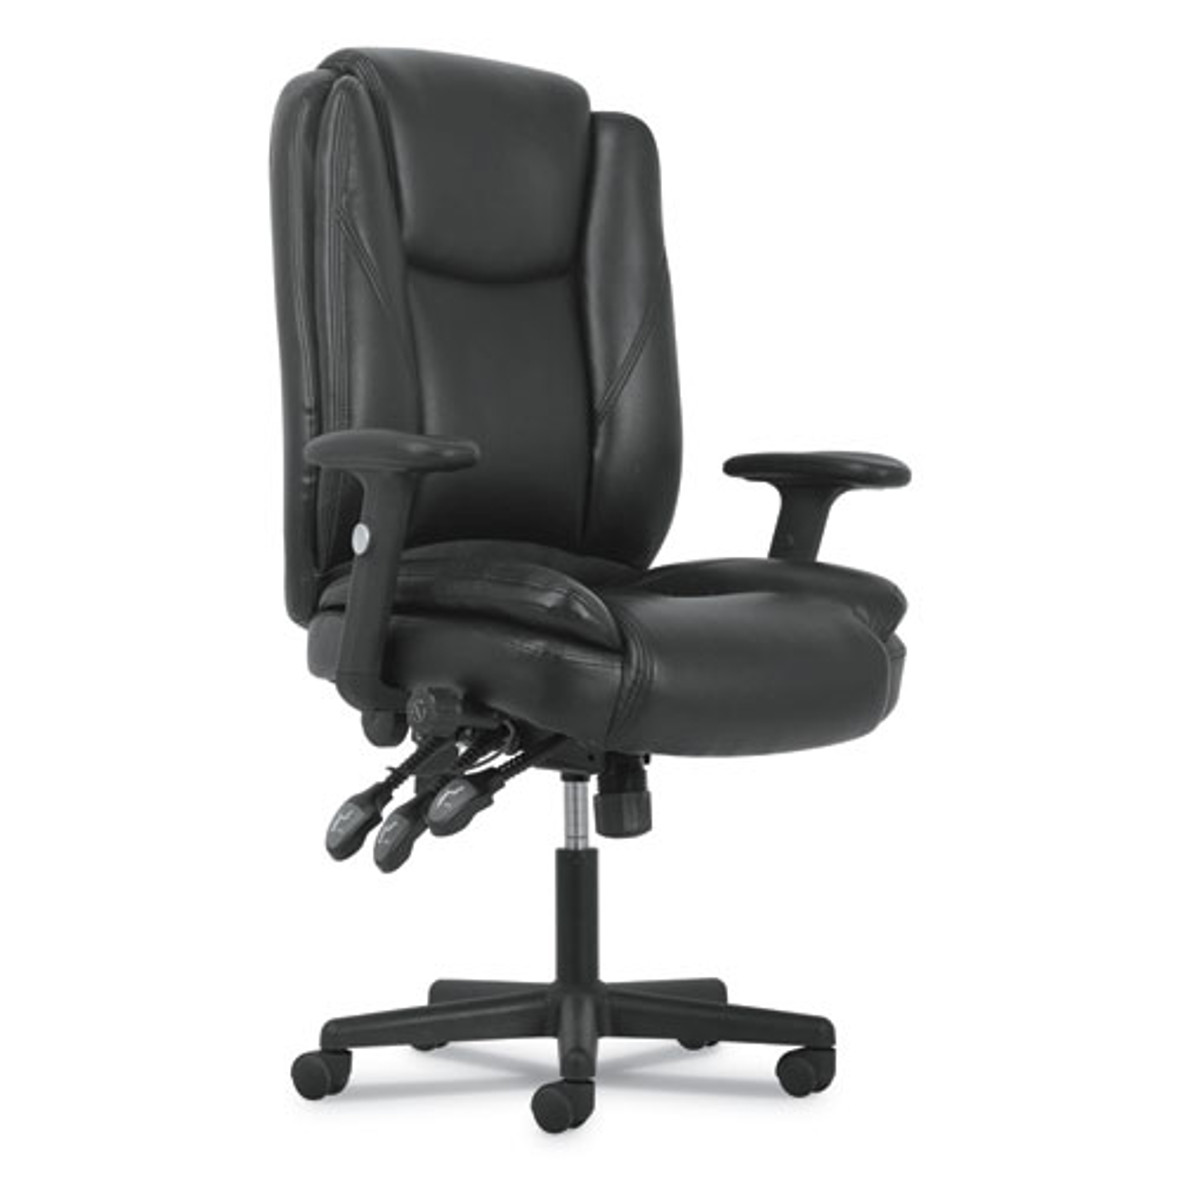 Sadie™ High-Back Executive Chair, Supports Up To 225 lb, 17" To 20" Seat Height, Black, 1 Each/Carton